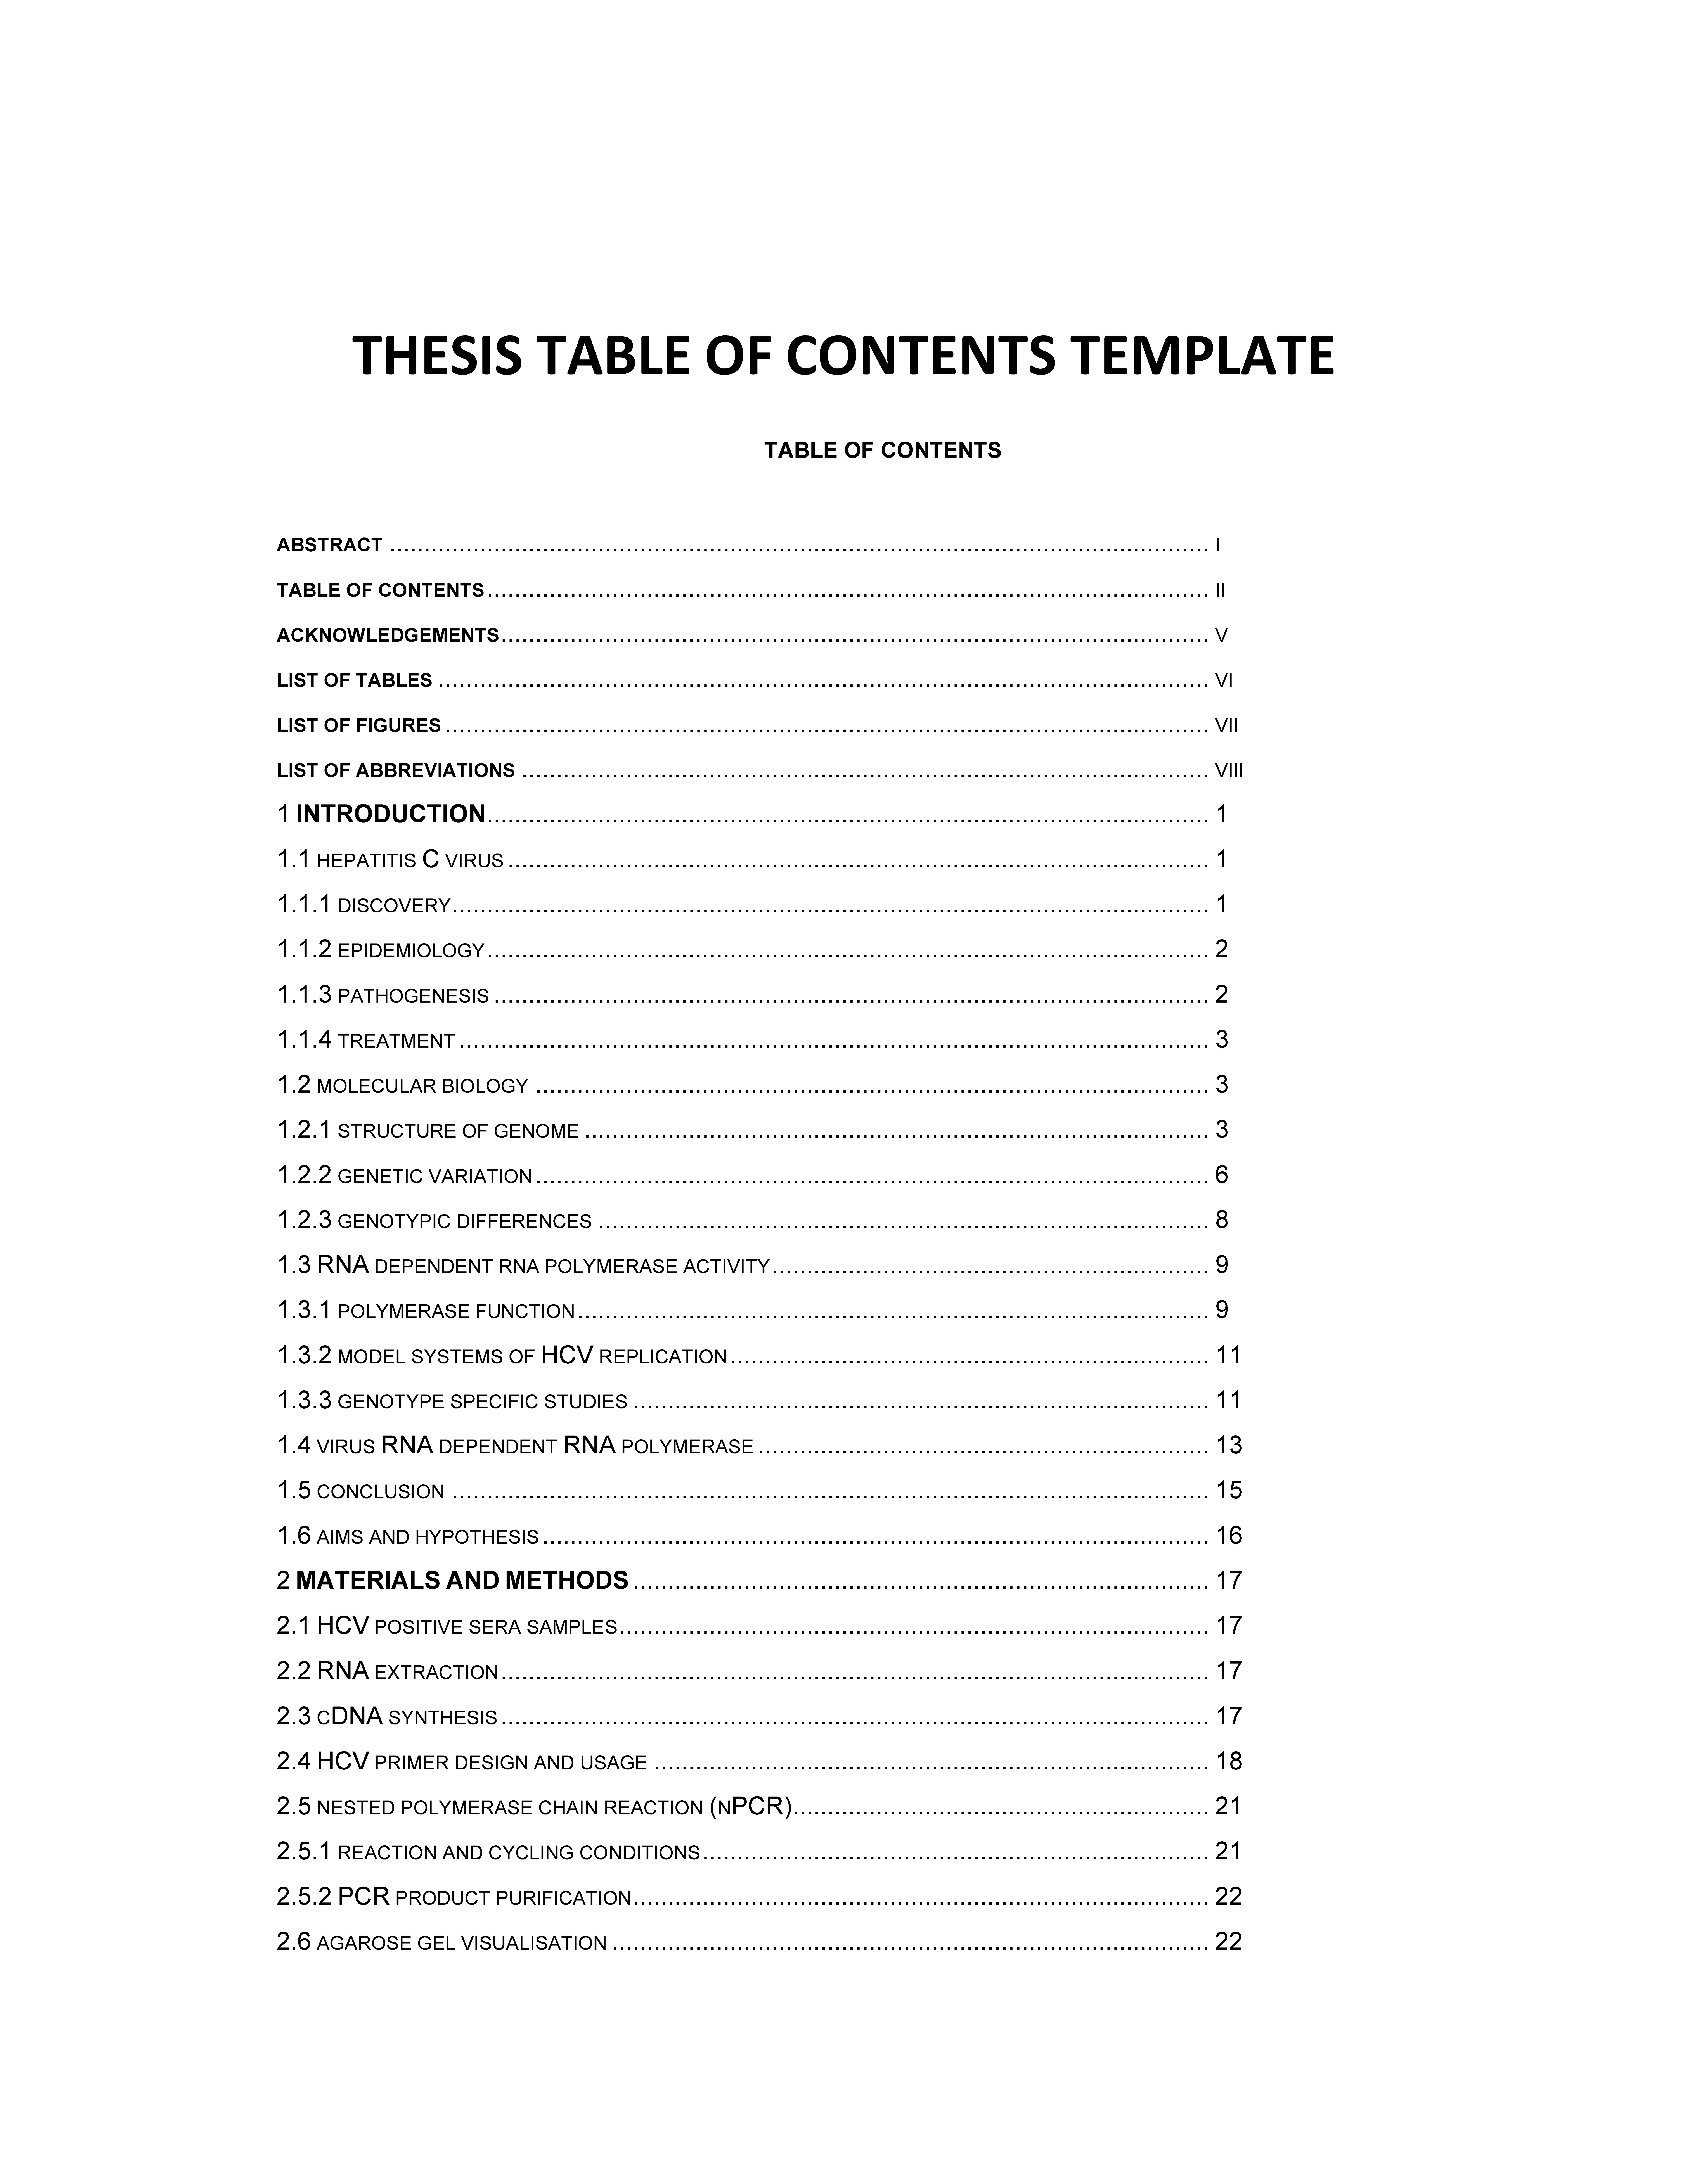 research table of contents template template